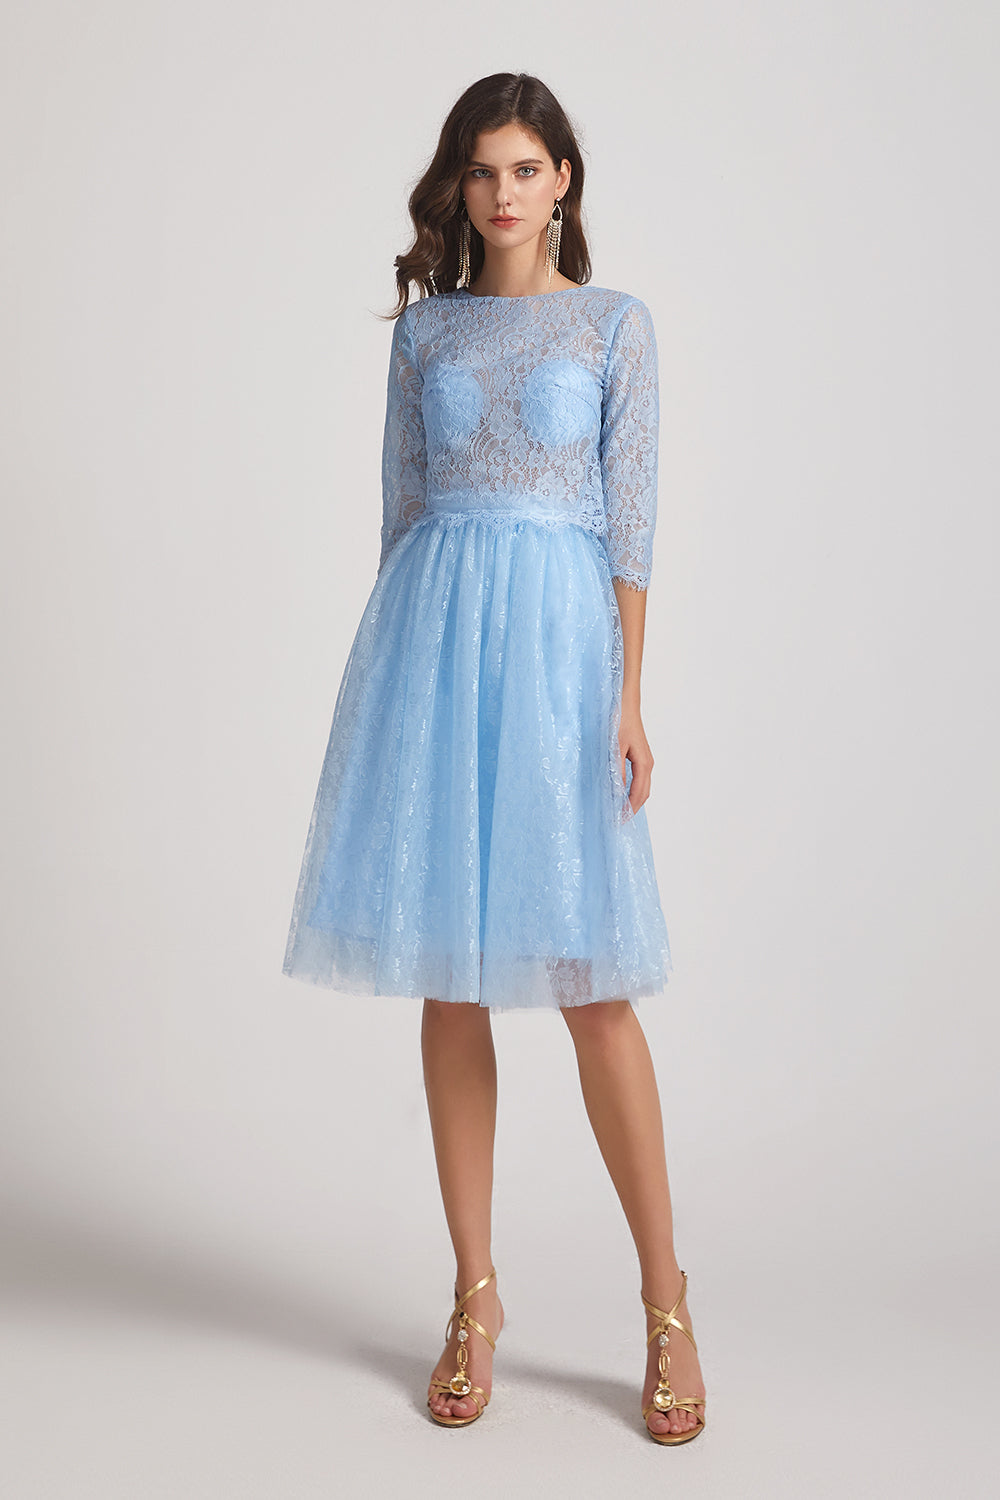 sheer lace party dress